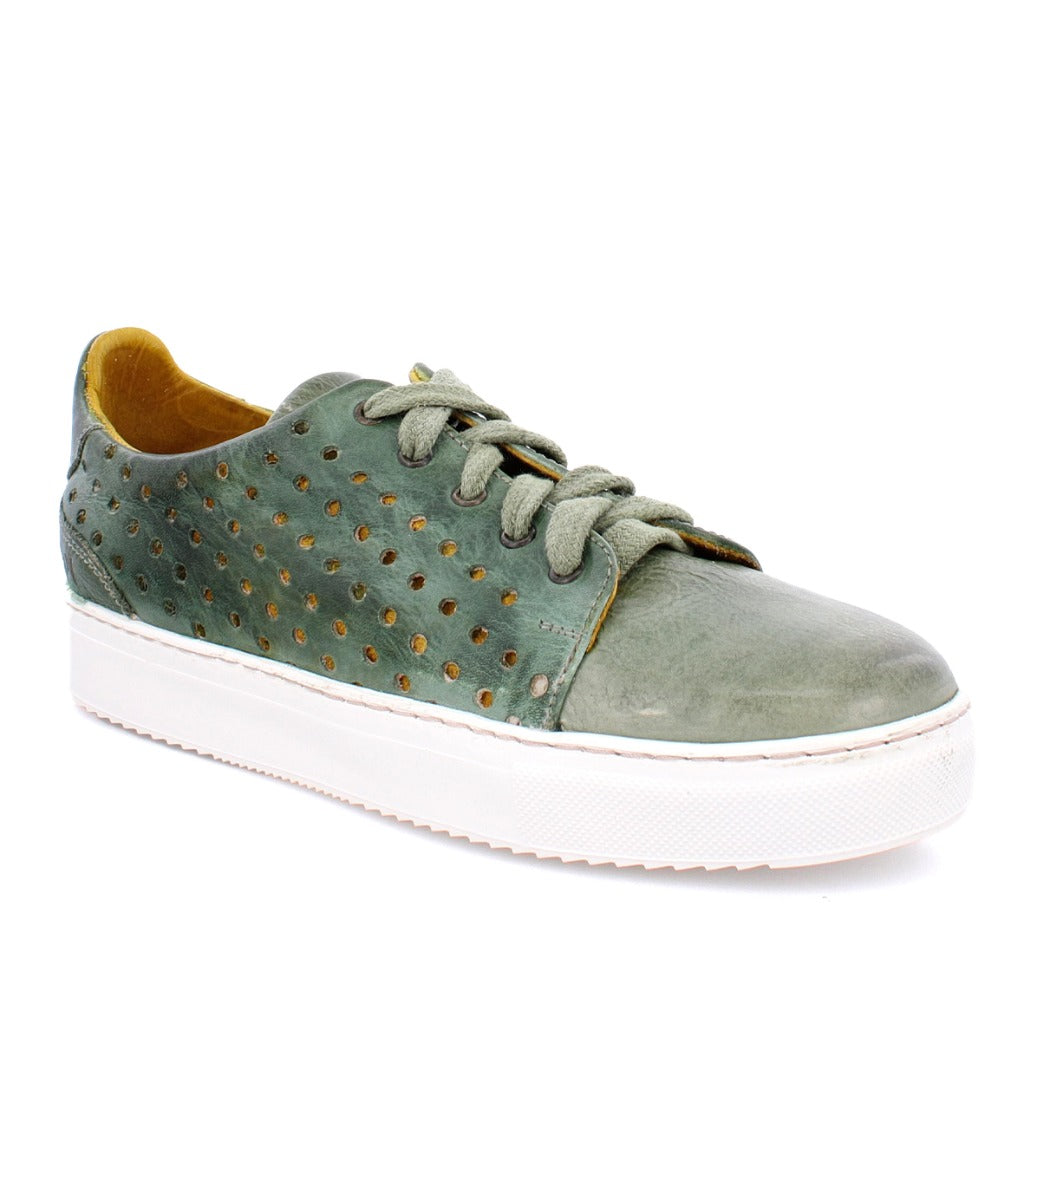 A women's Lyne green leather sneaker with perforations by Bed Stu.